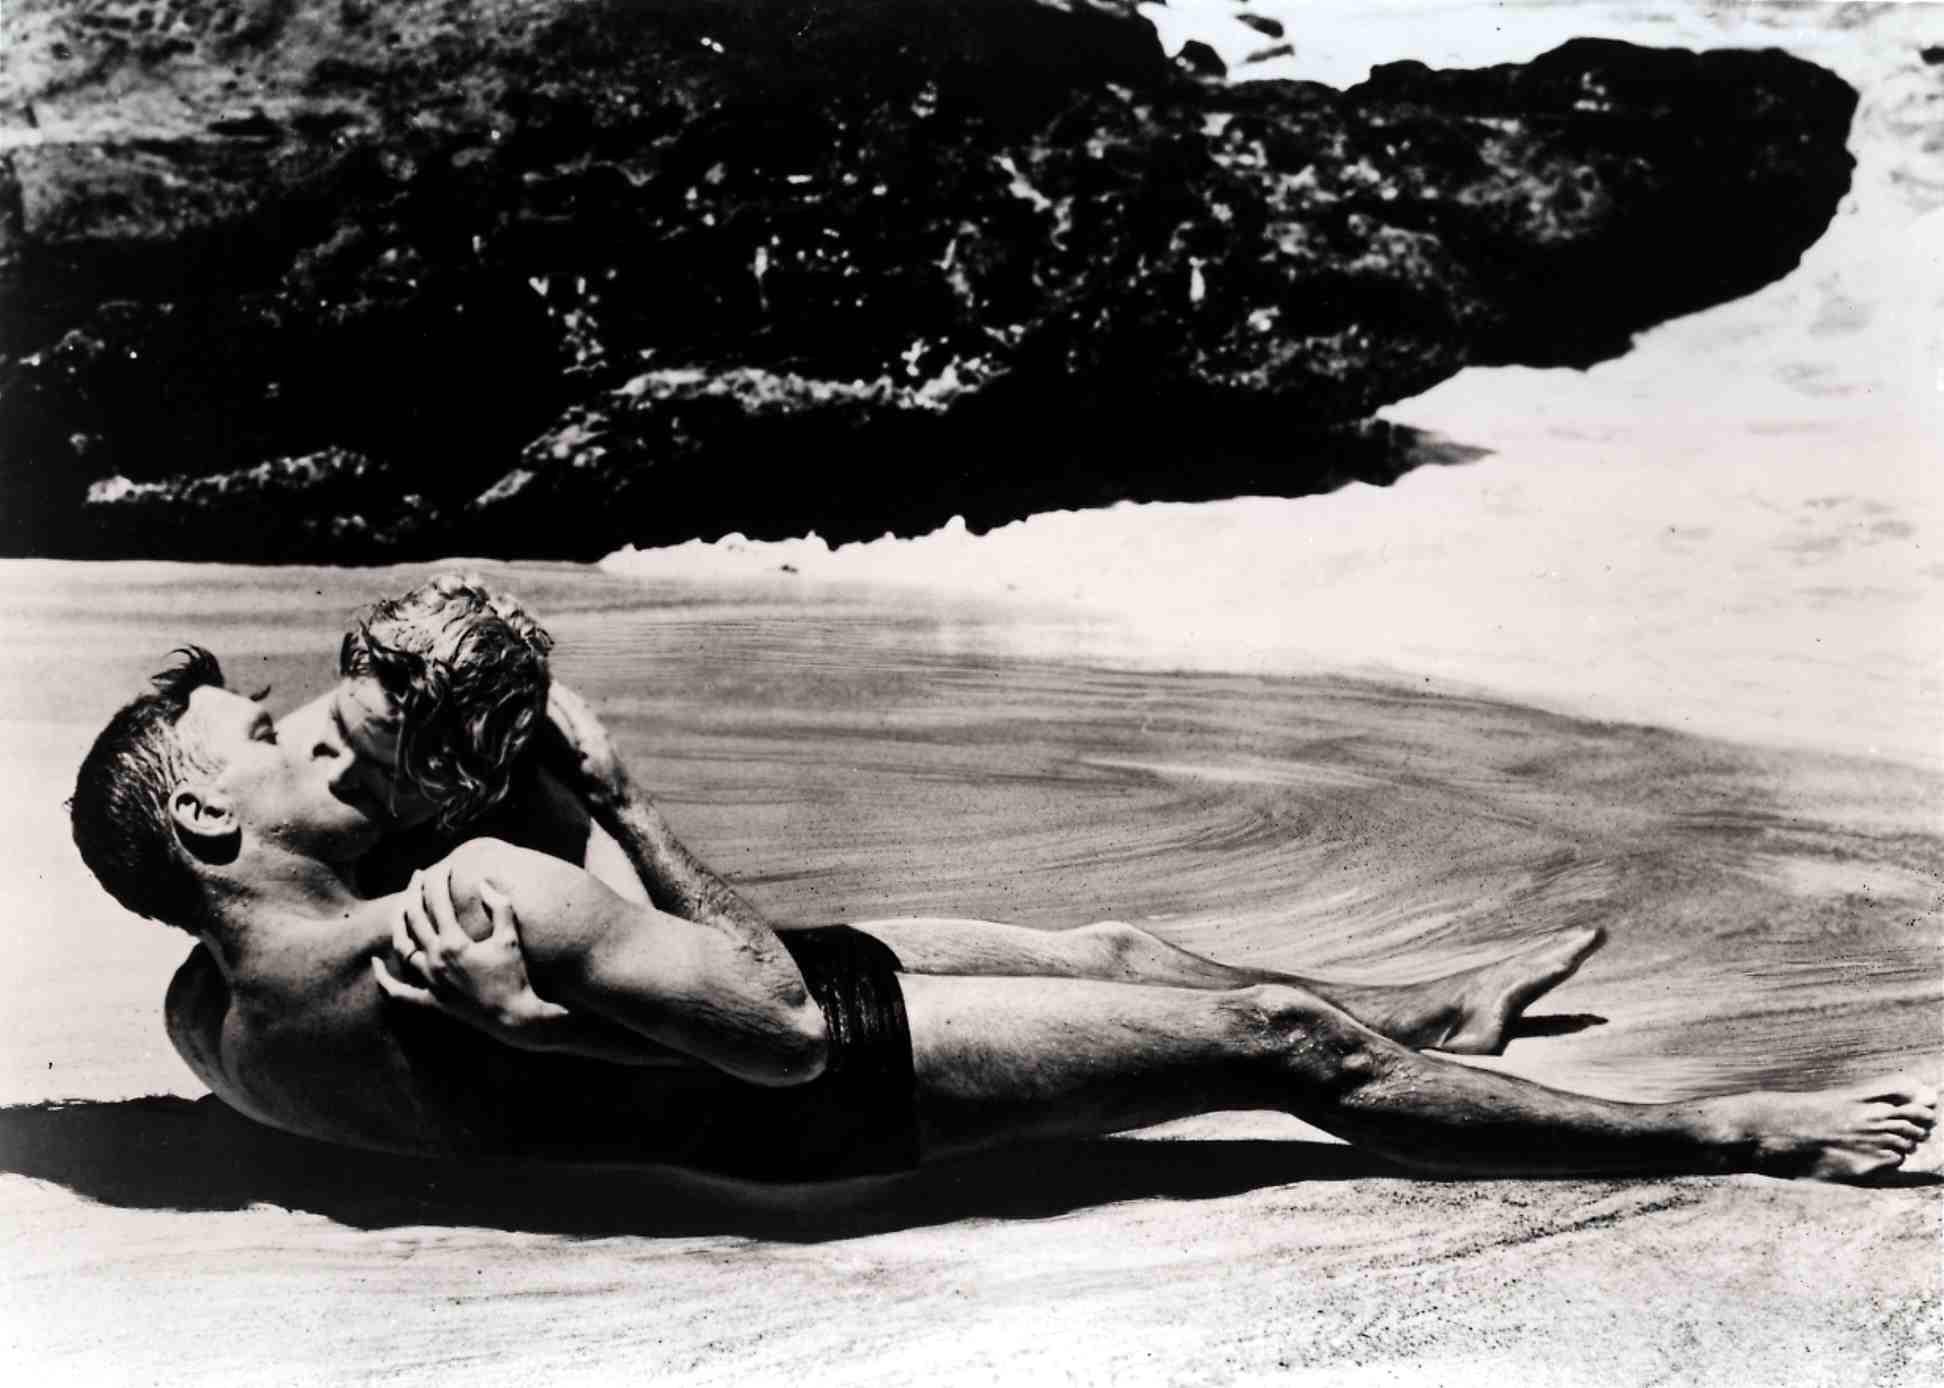 Burt Lancaster and Deborah Kerr on the beach in From Here to Eternity